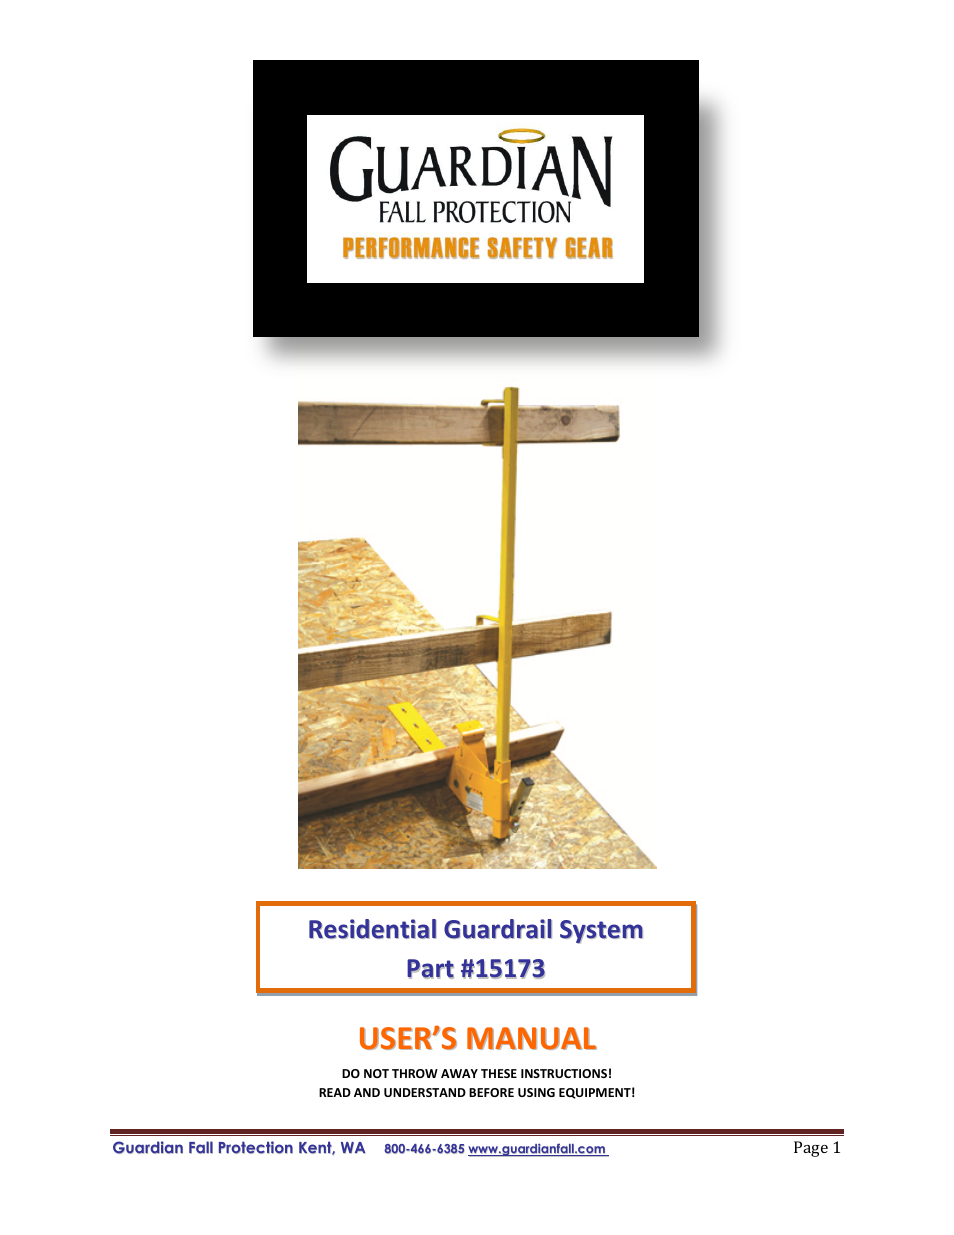 Residential Guardrail System